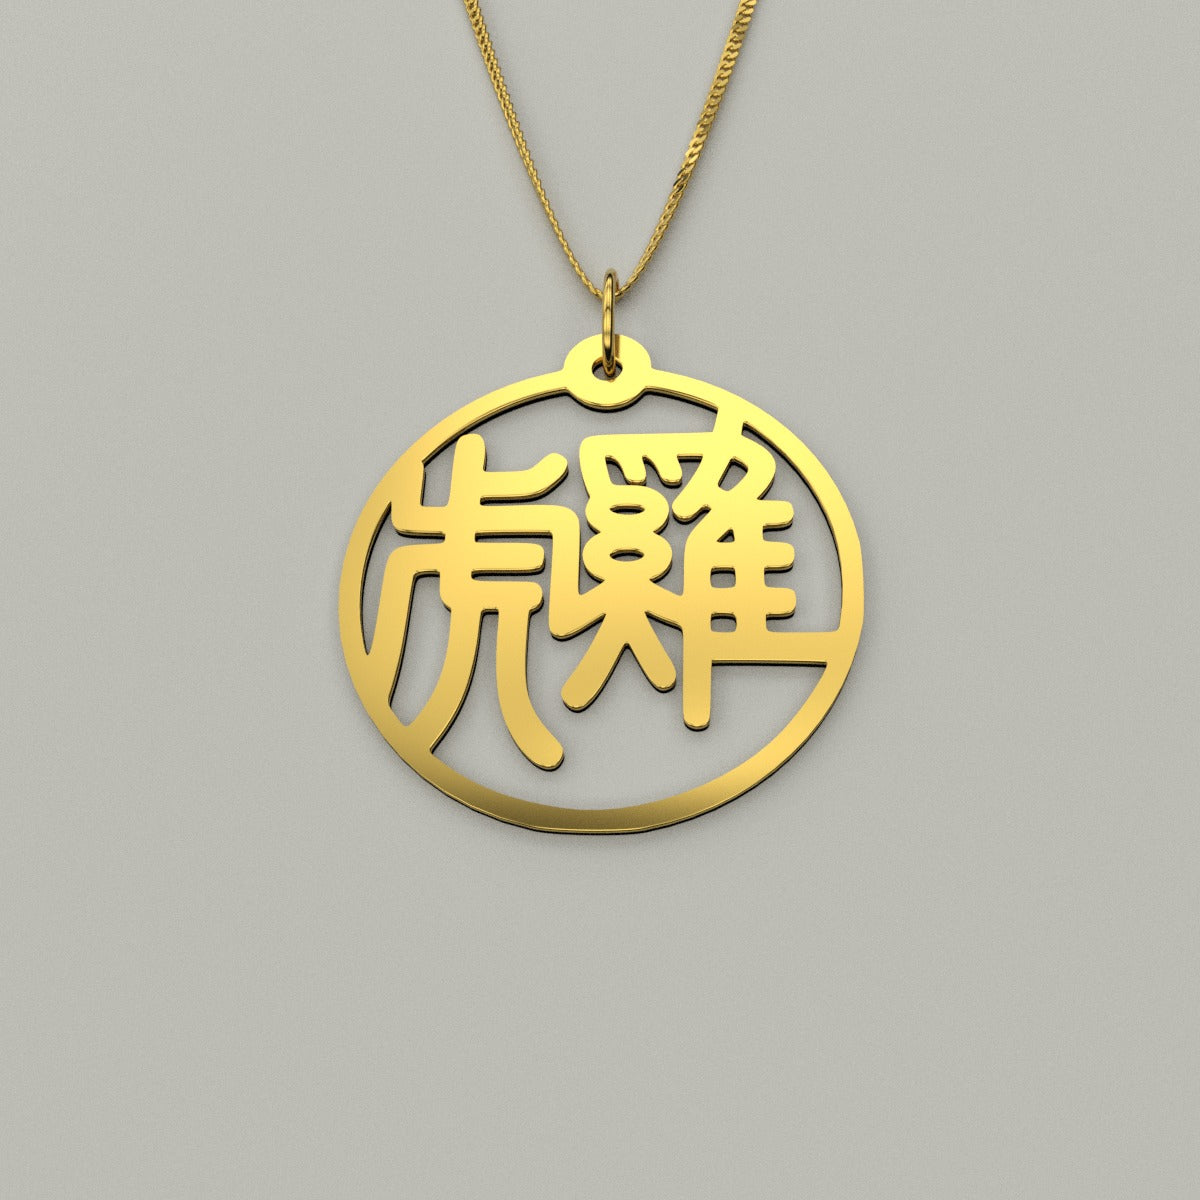 Tiger & Rooster - Couple Necklace